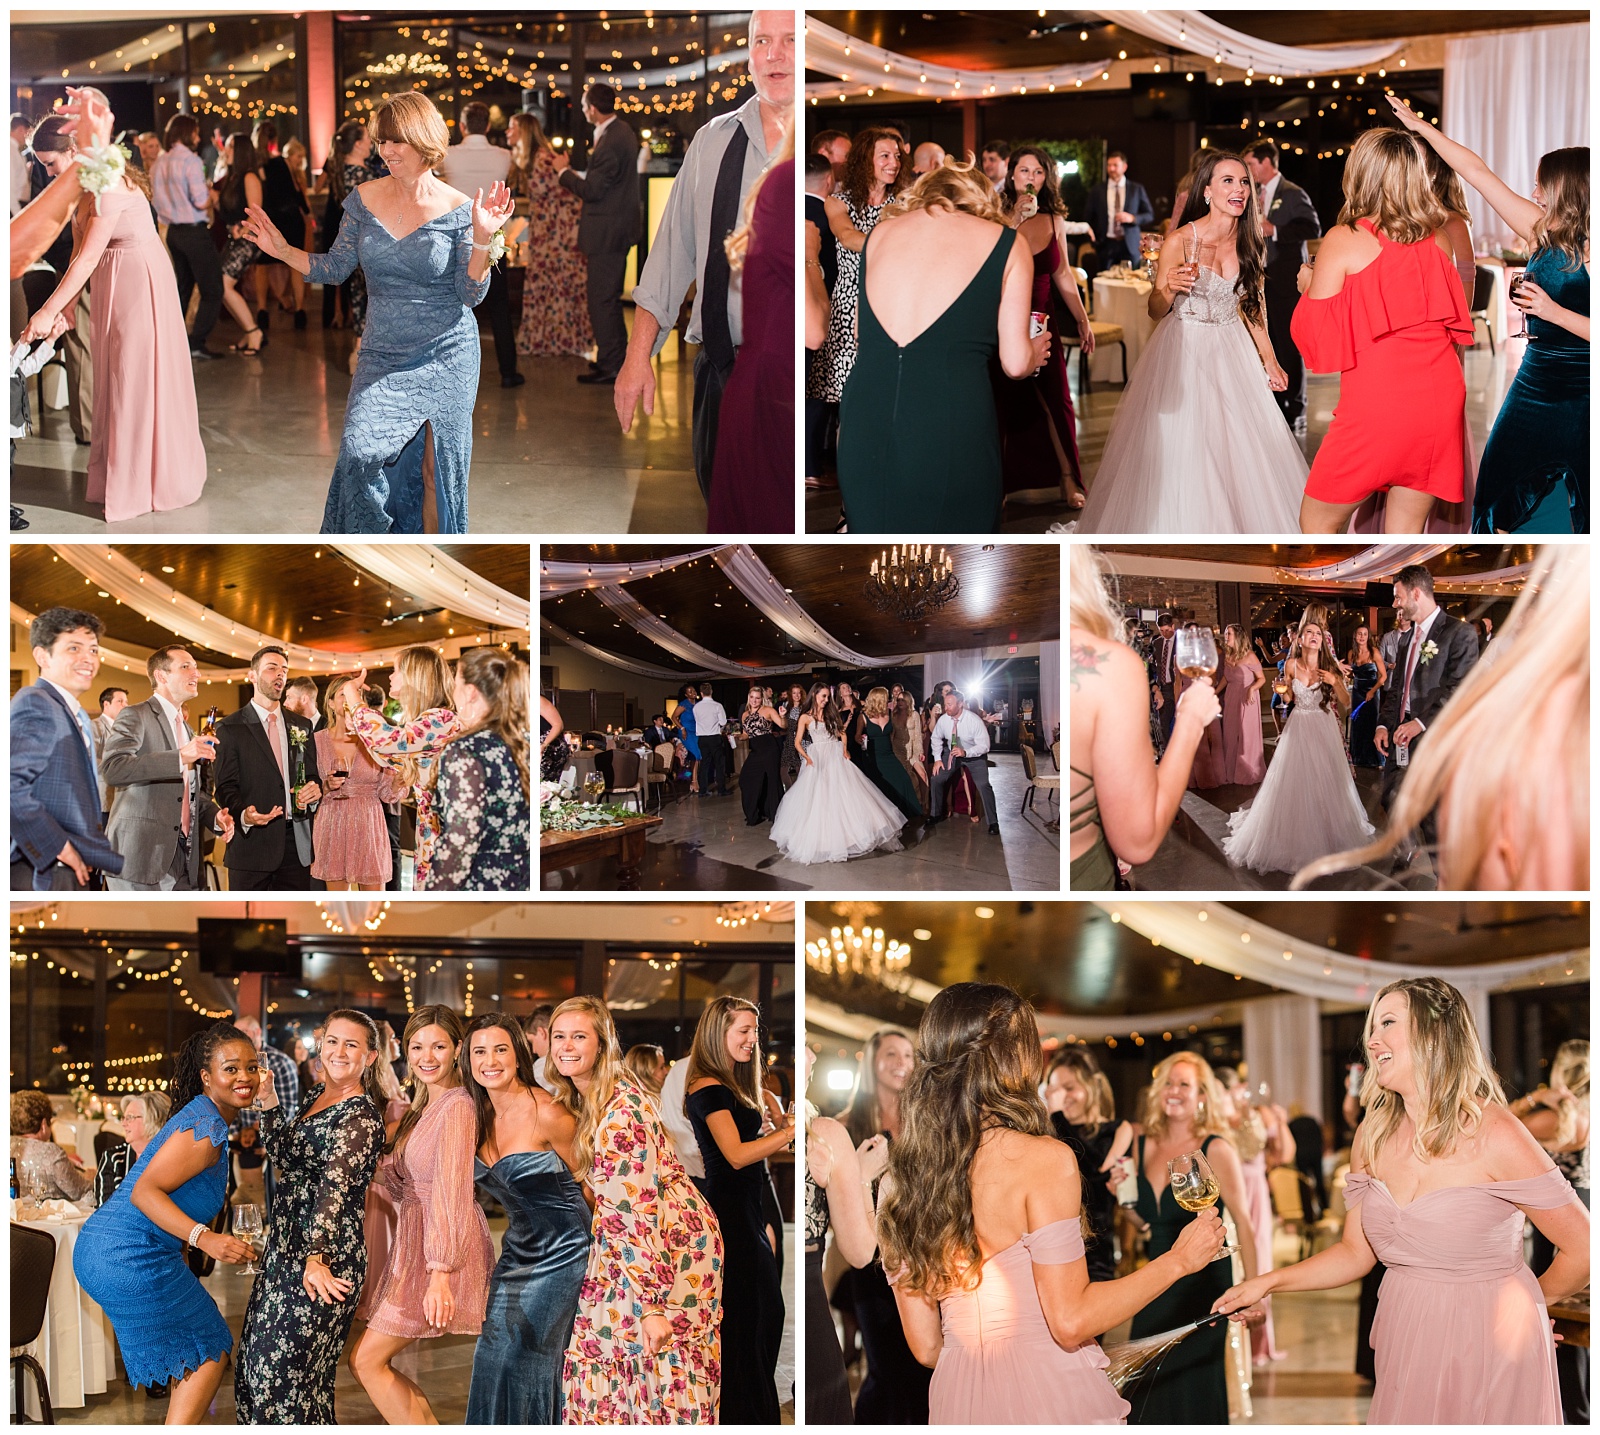 Collage of wedding reception images including lots of dancing, guests celebrating, and bride having fun with her wedding party